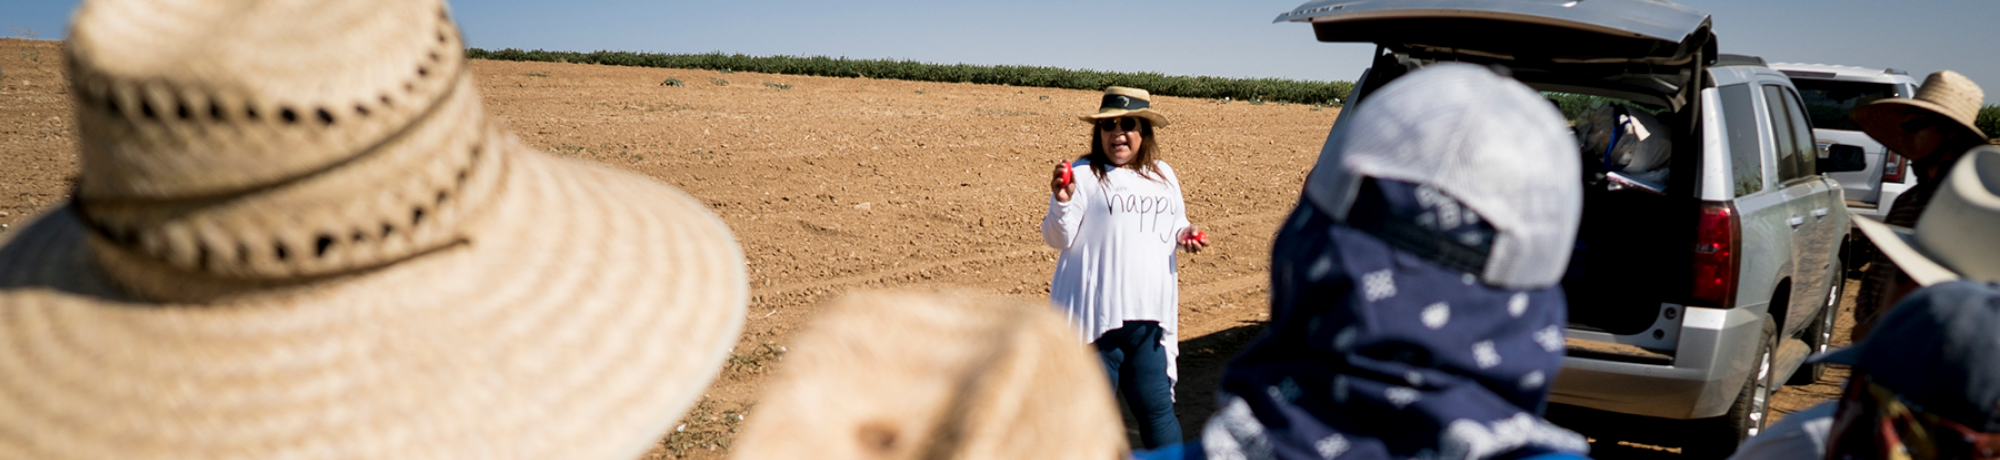 A person trains farmworkers in the field